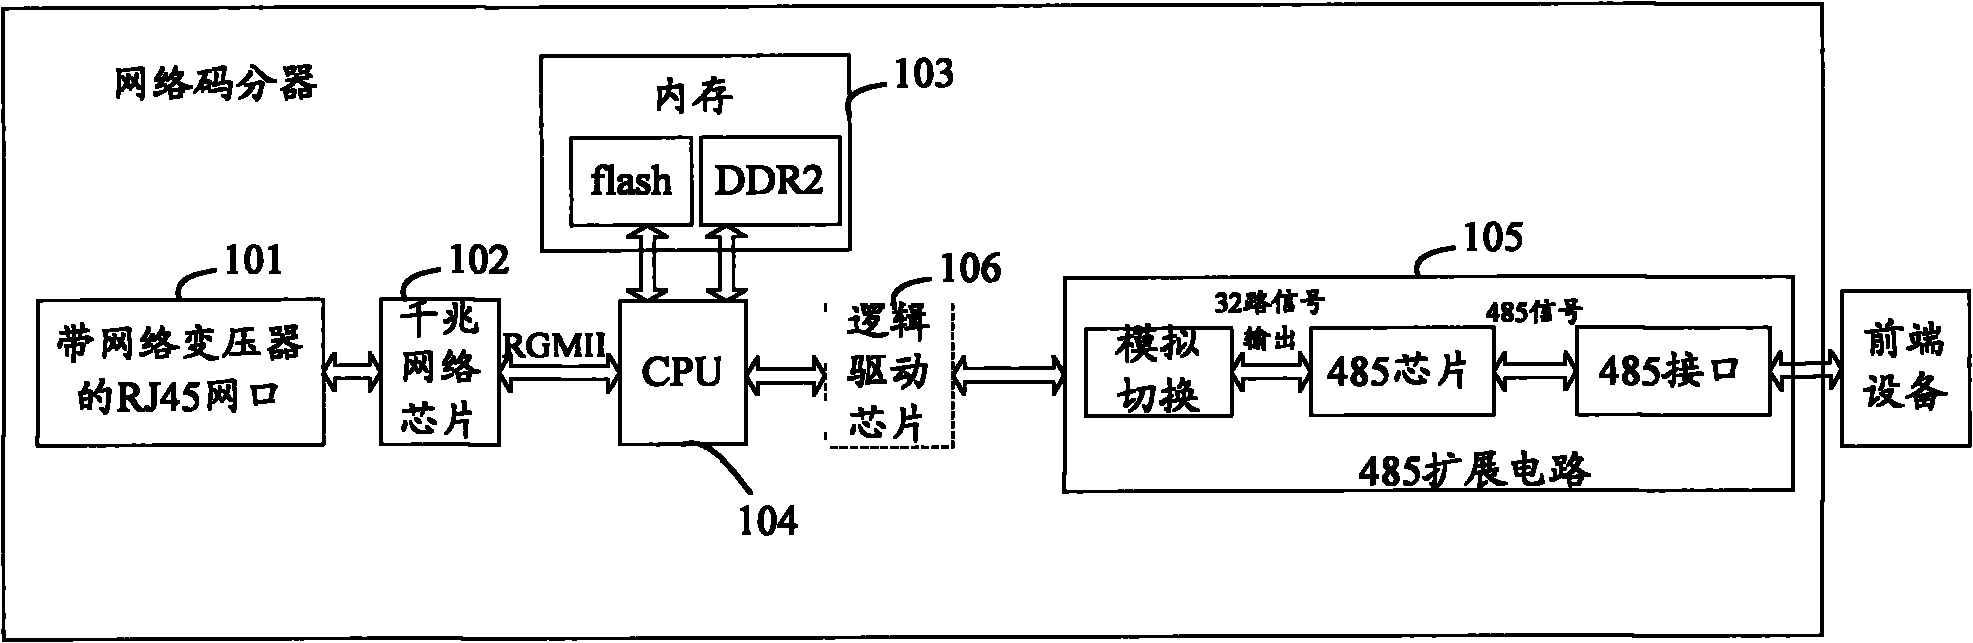 Network code divider and method for controlling front-end equipment